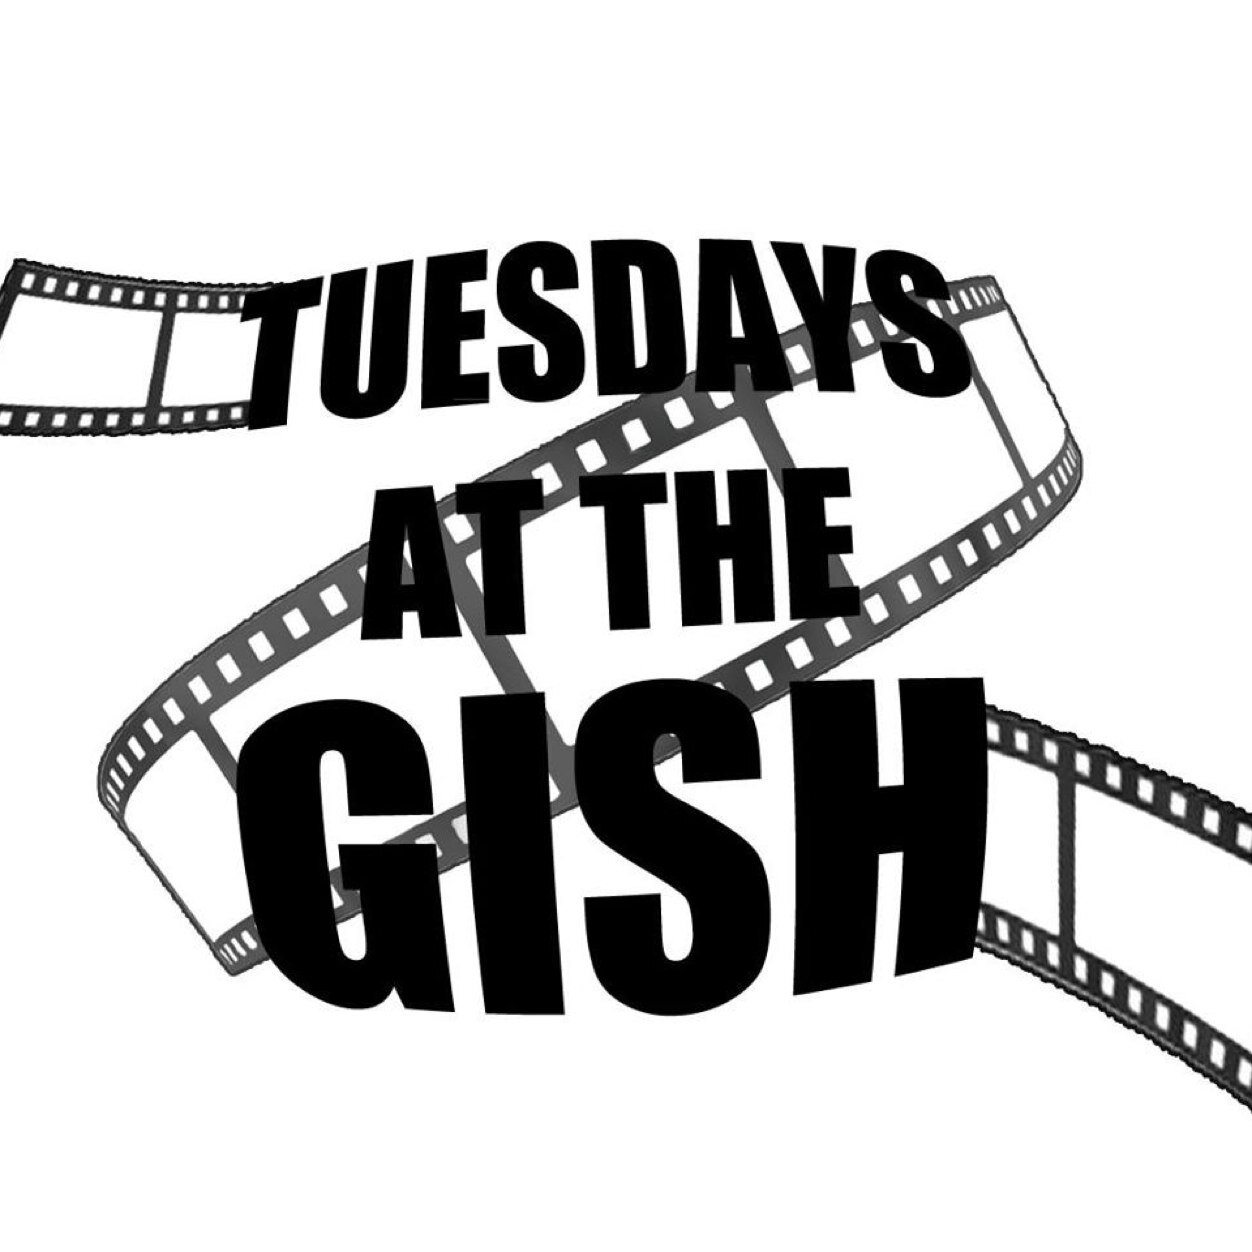 The Tuesdays at the Gish Film Series is dedicated to providing the university and local community with free screenings of a diverse array of films.